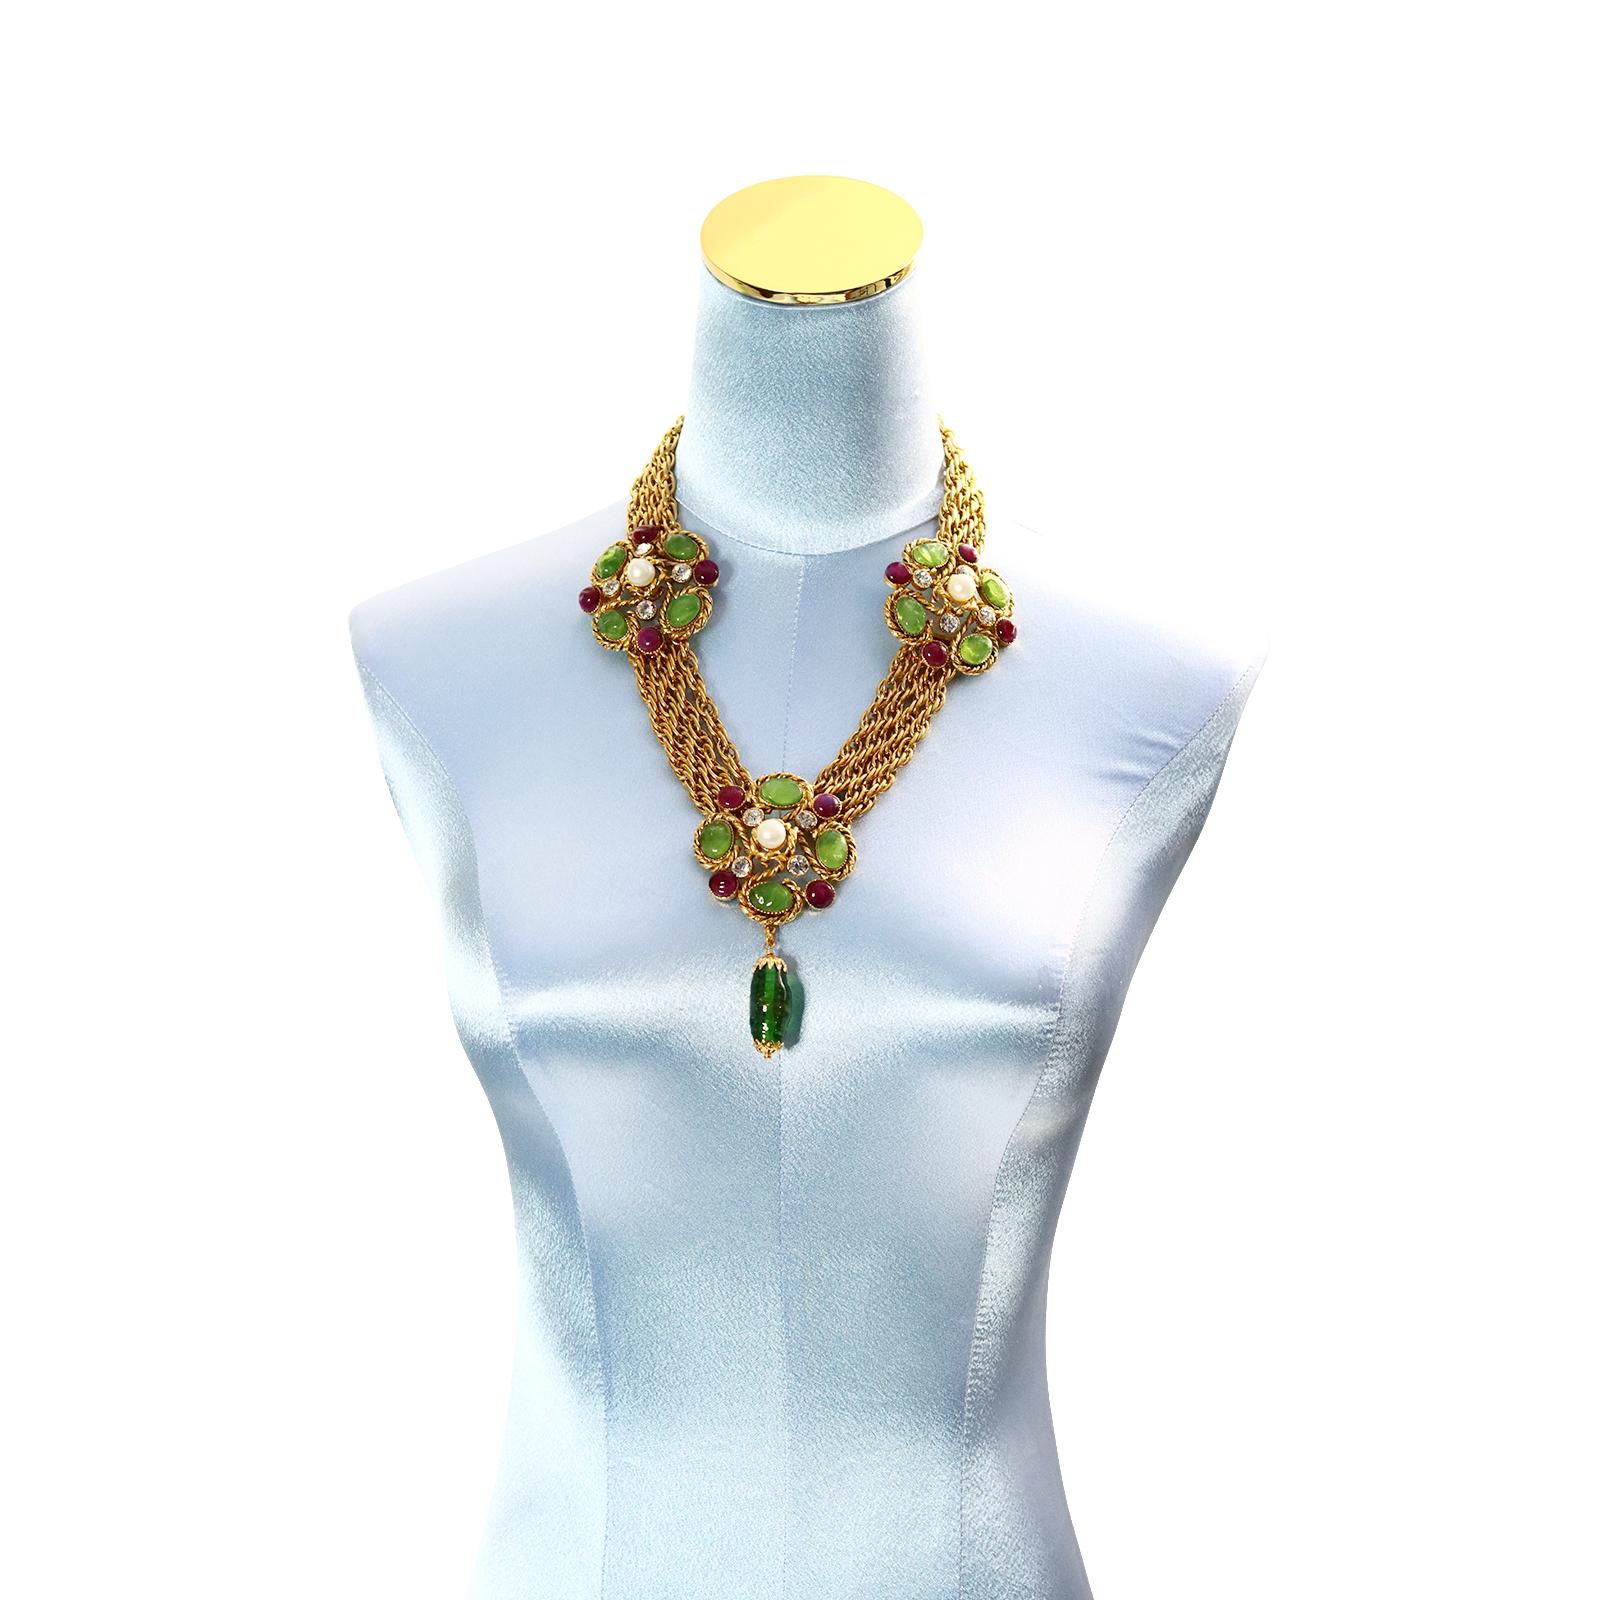 Artist Vintage Maison Gripoix Green, Crystal, Red Faux Pearl Gold Necklace Circa 1990s